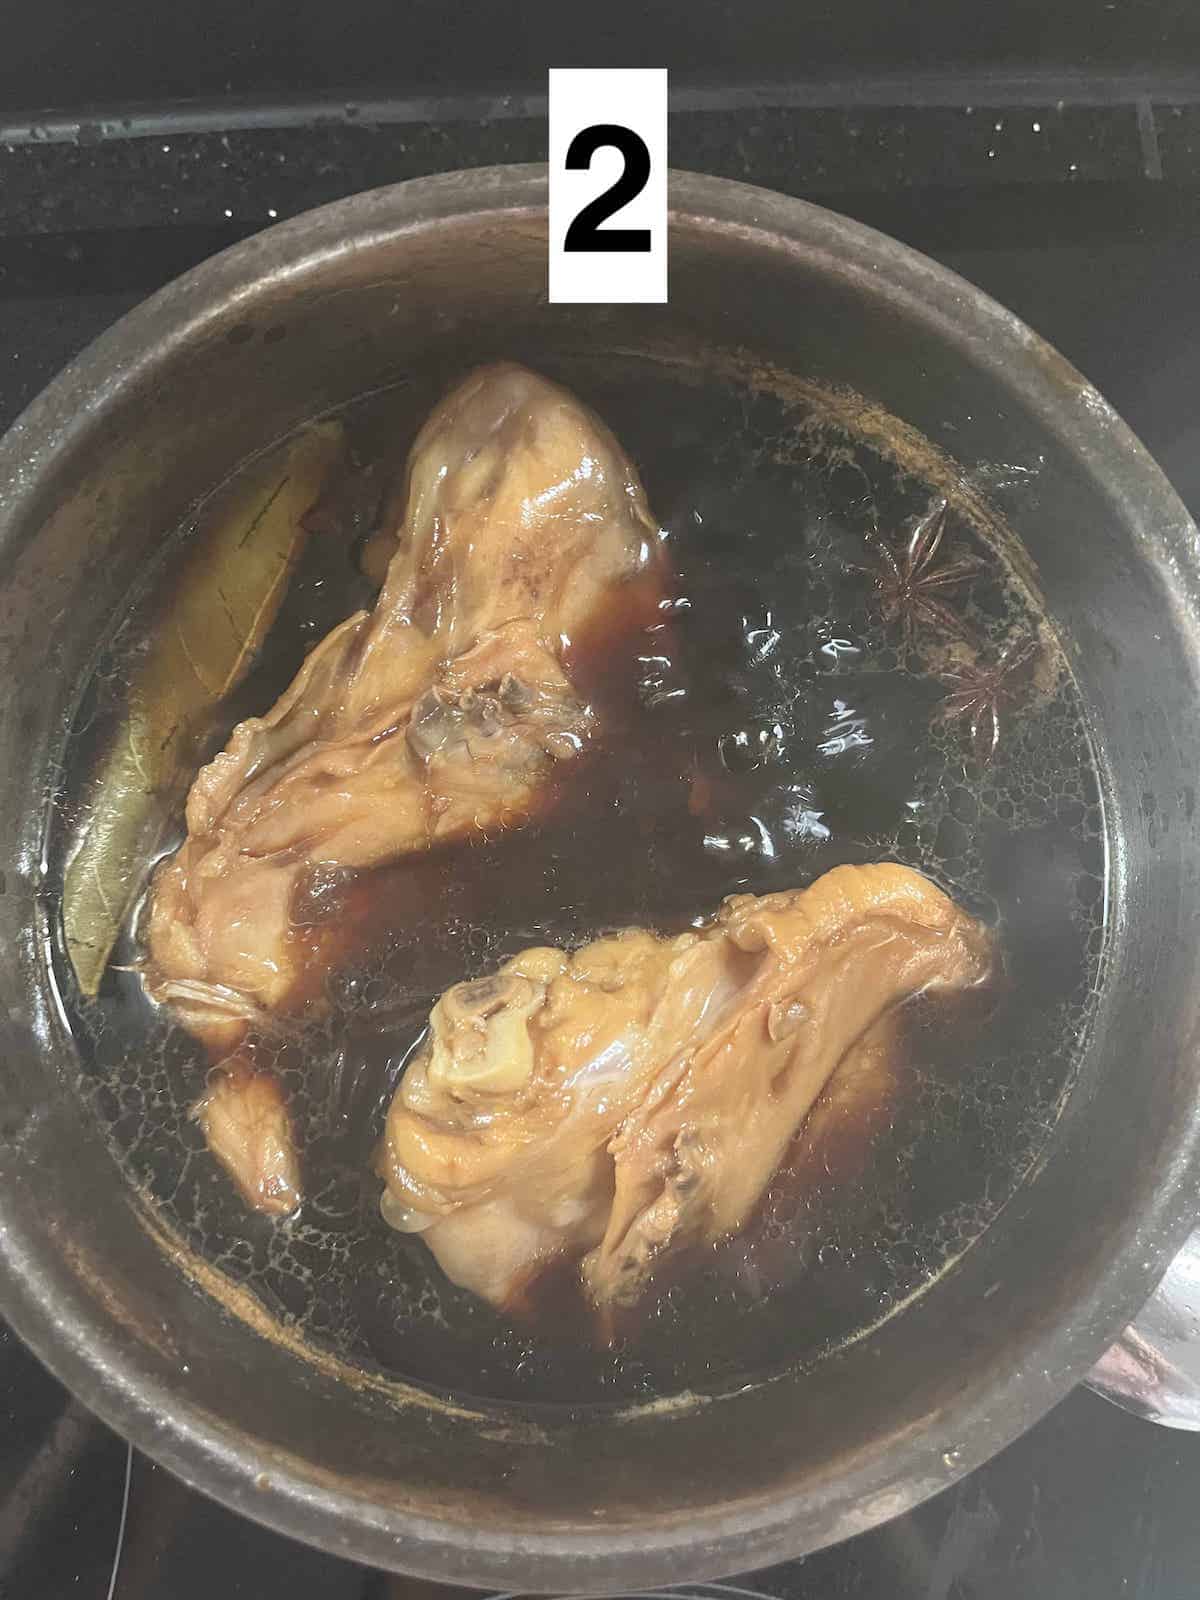 2 chicken thighs in soy sauce braising liquid with some bubbles around them.